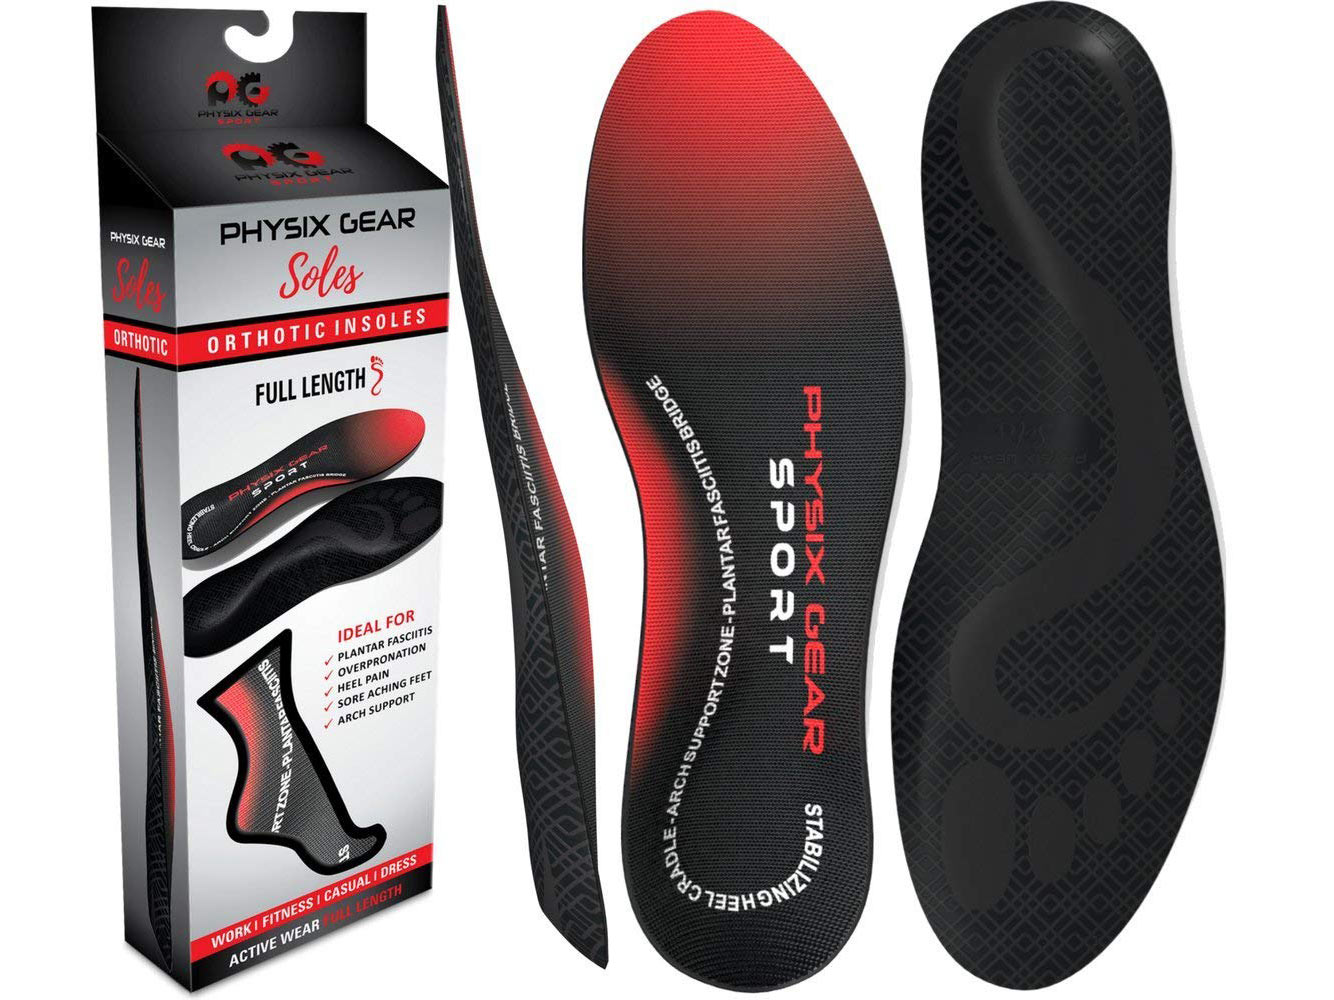 Physix Gear Sport Full Length Orthotic Inserts with Arch Support